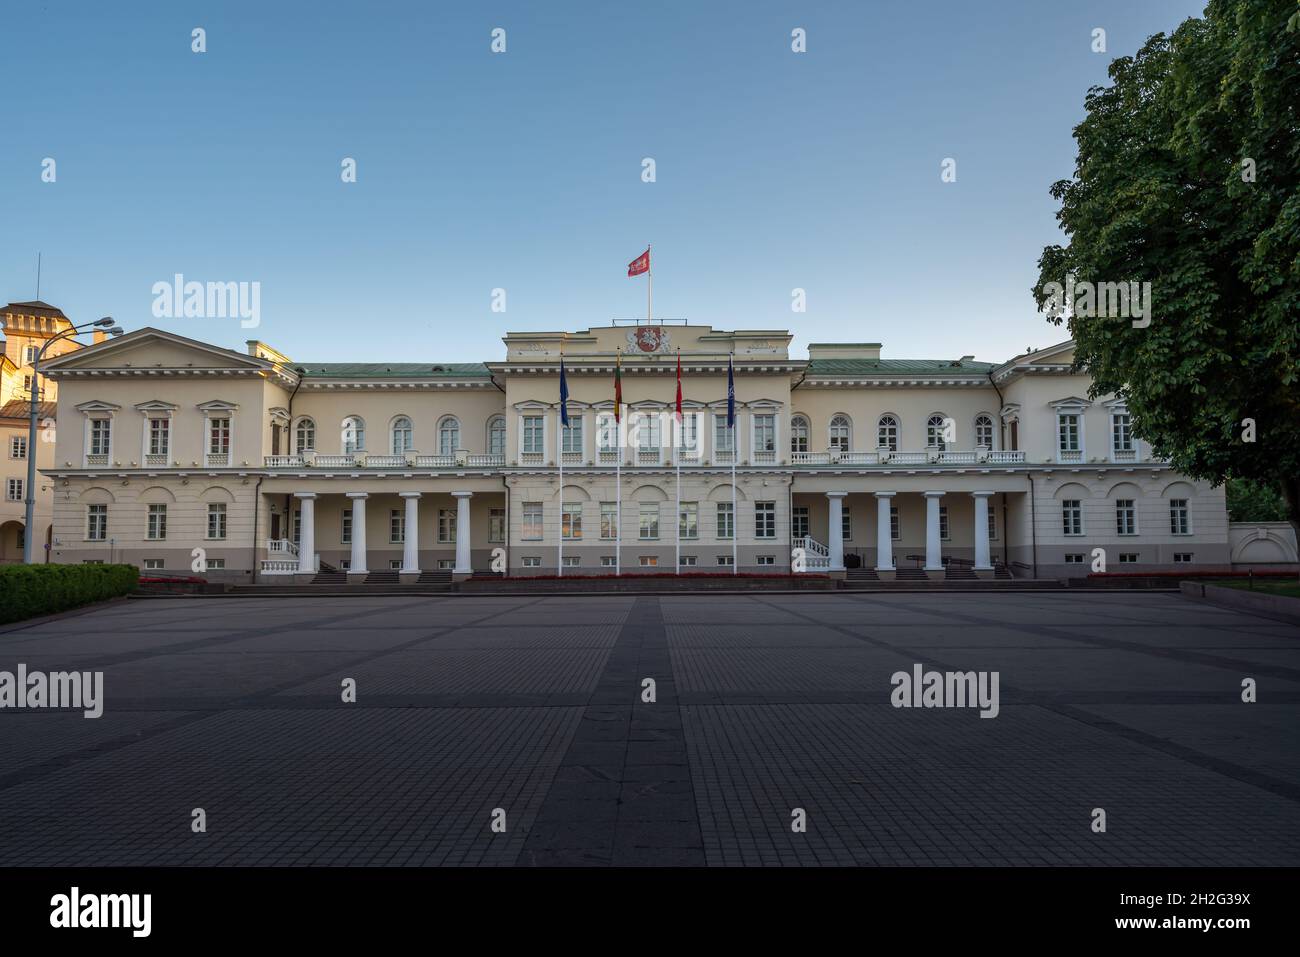 Presidential Palace official office and residence of the President of Lithuania - Vilnius, Lithuania Stock Photo